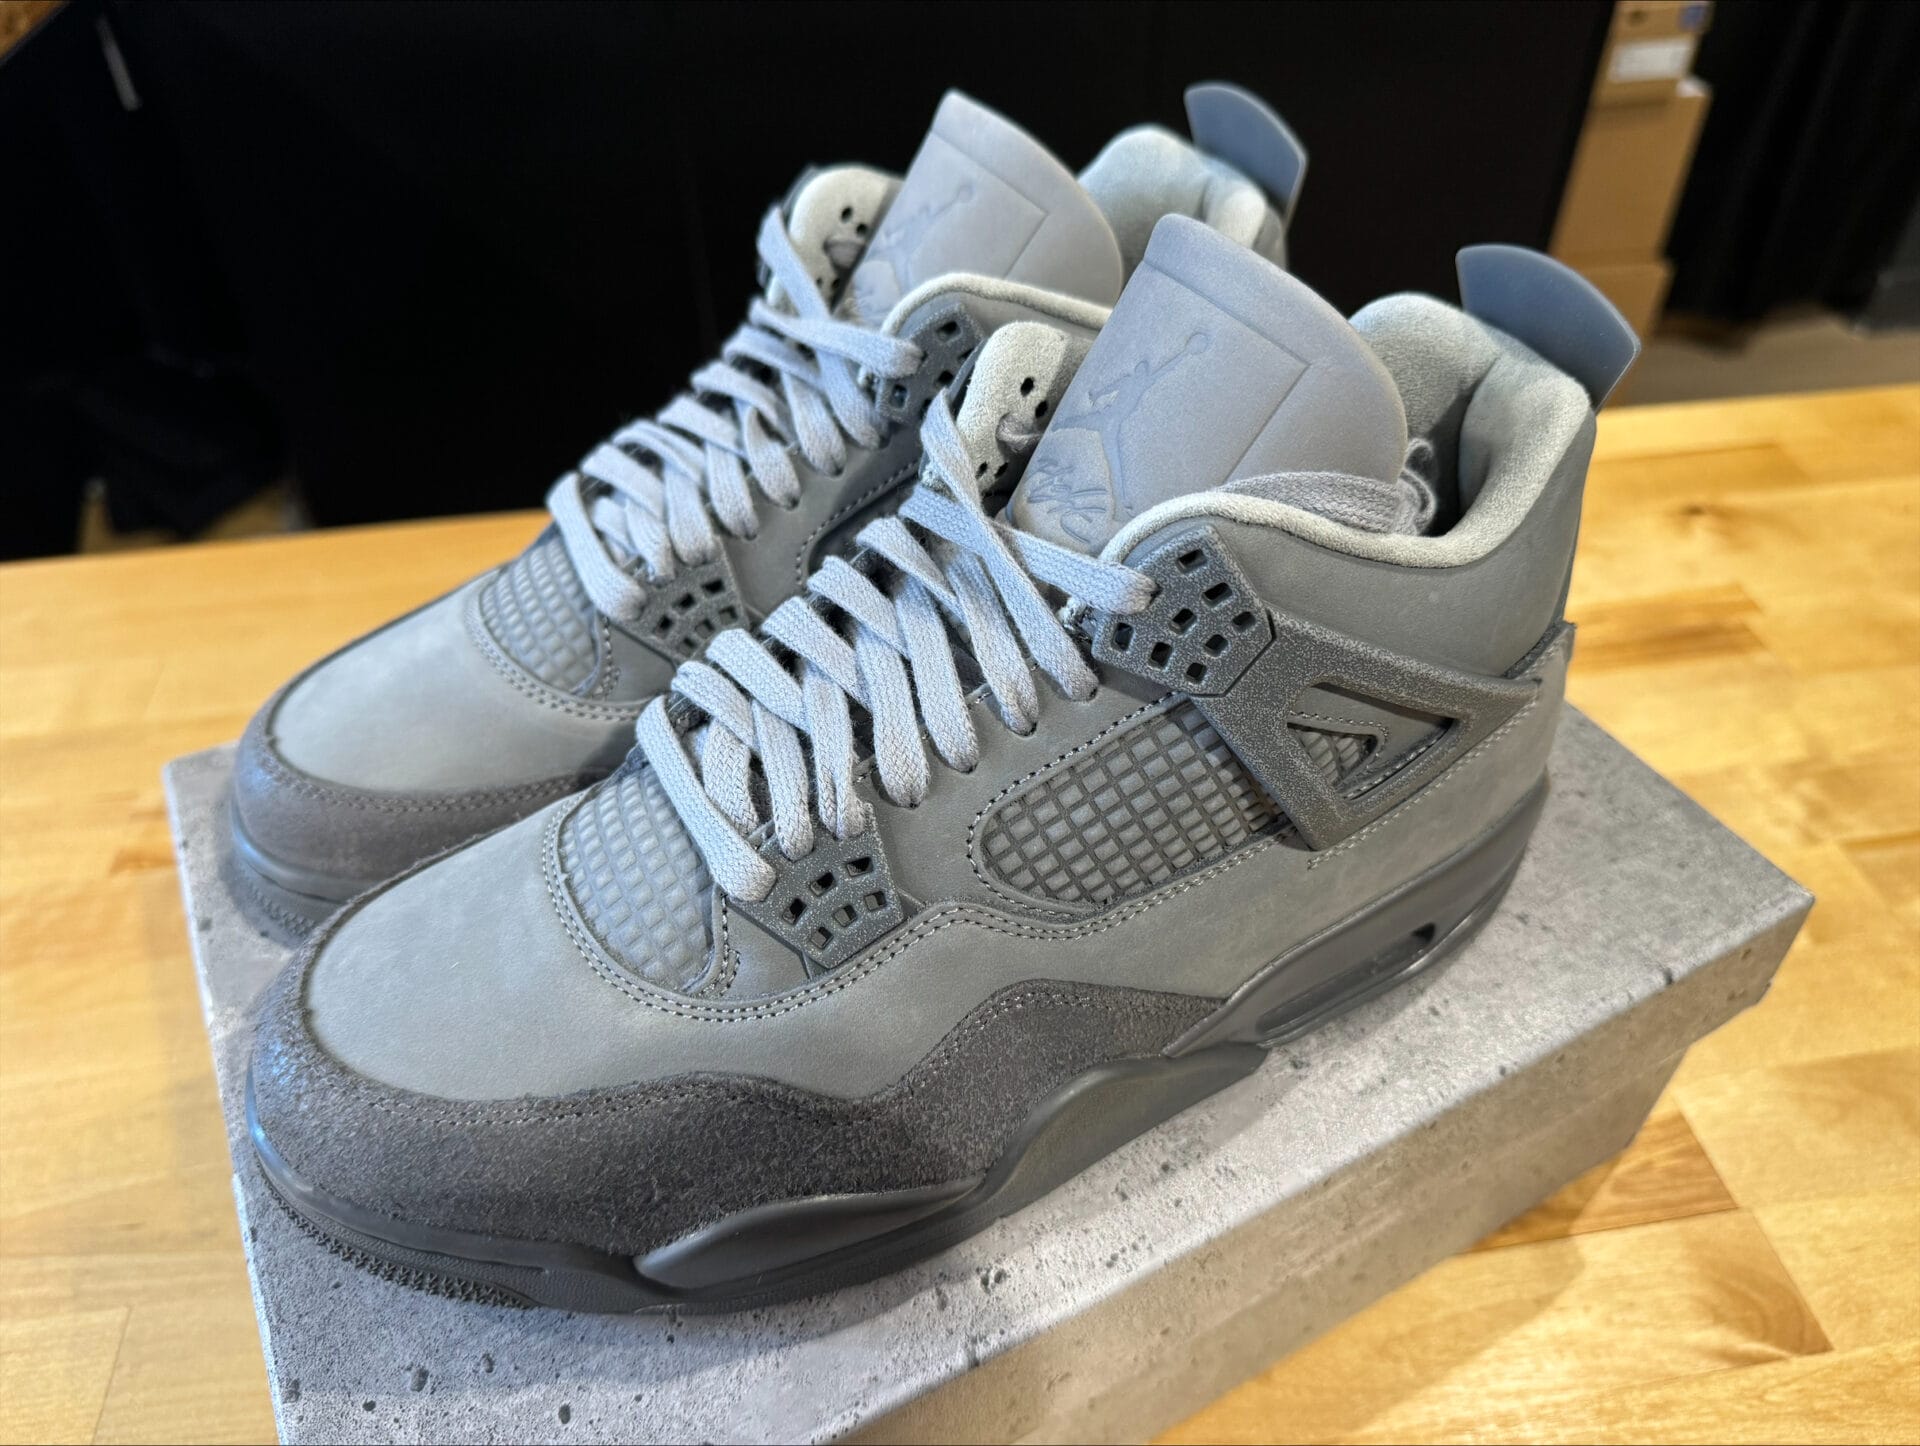 The Wet Cement edition of the the Air Jordan 4 dropped Saturday morning and about a dozen people waited for the shoes outside the Corporate store in downtown Indianapolis. The first person in line told News 8 that they got in line at 7:30 a.m. for a 10 a.m. release. The 